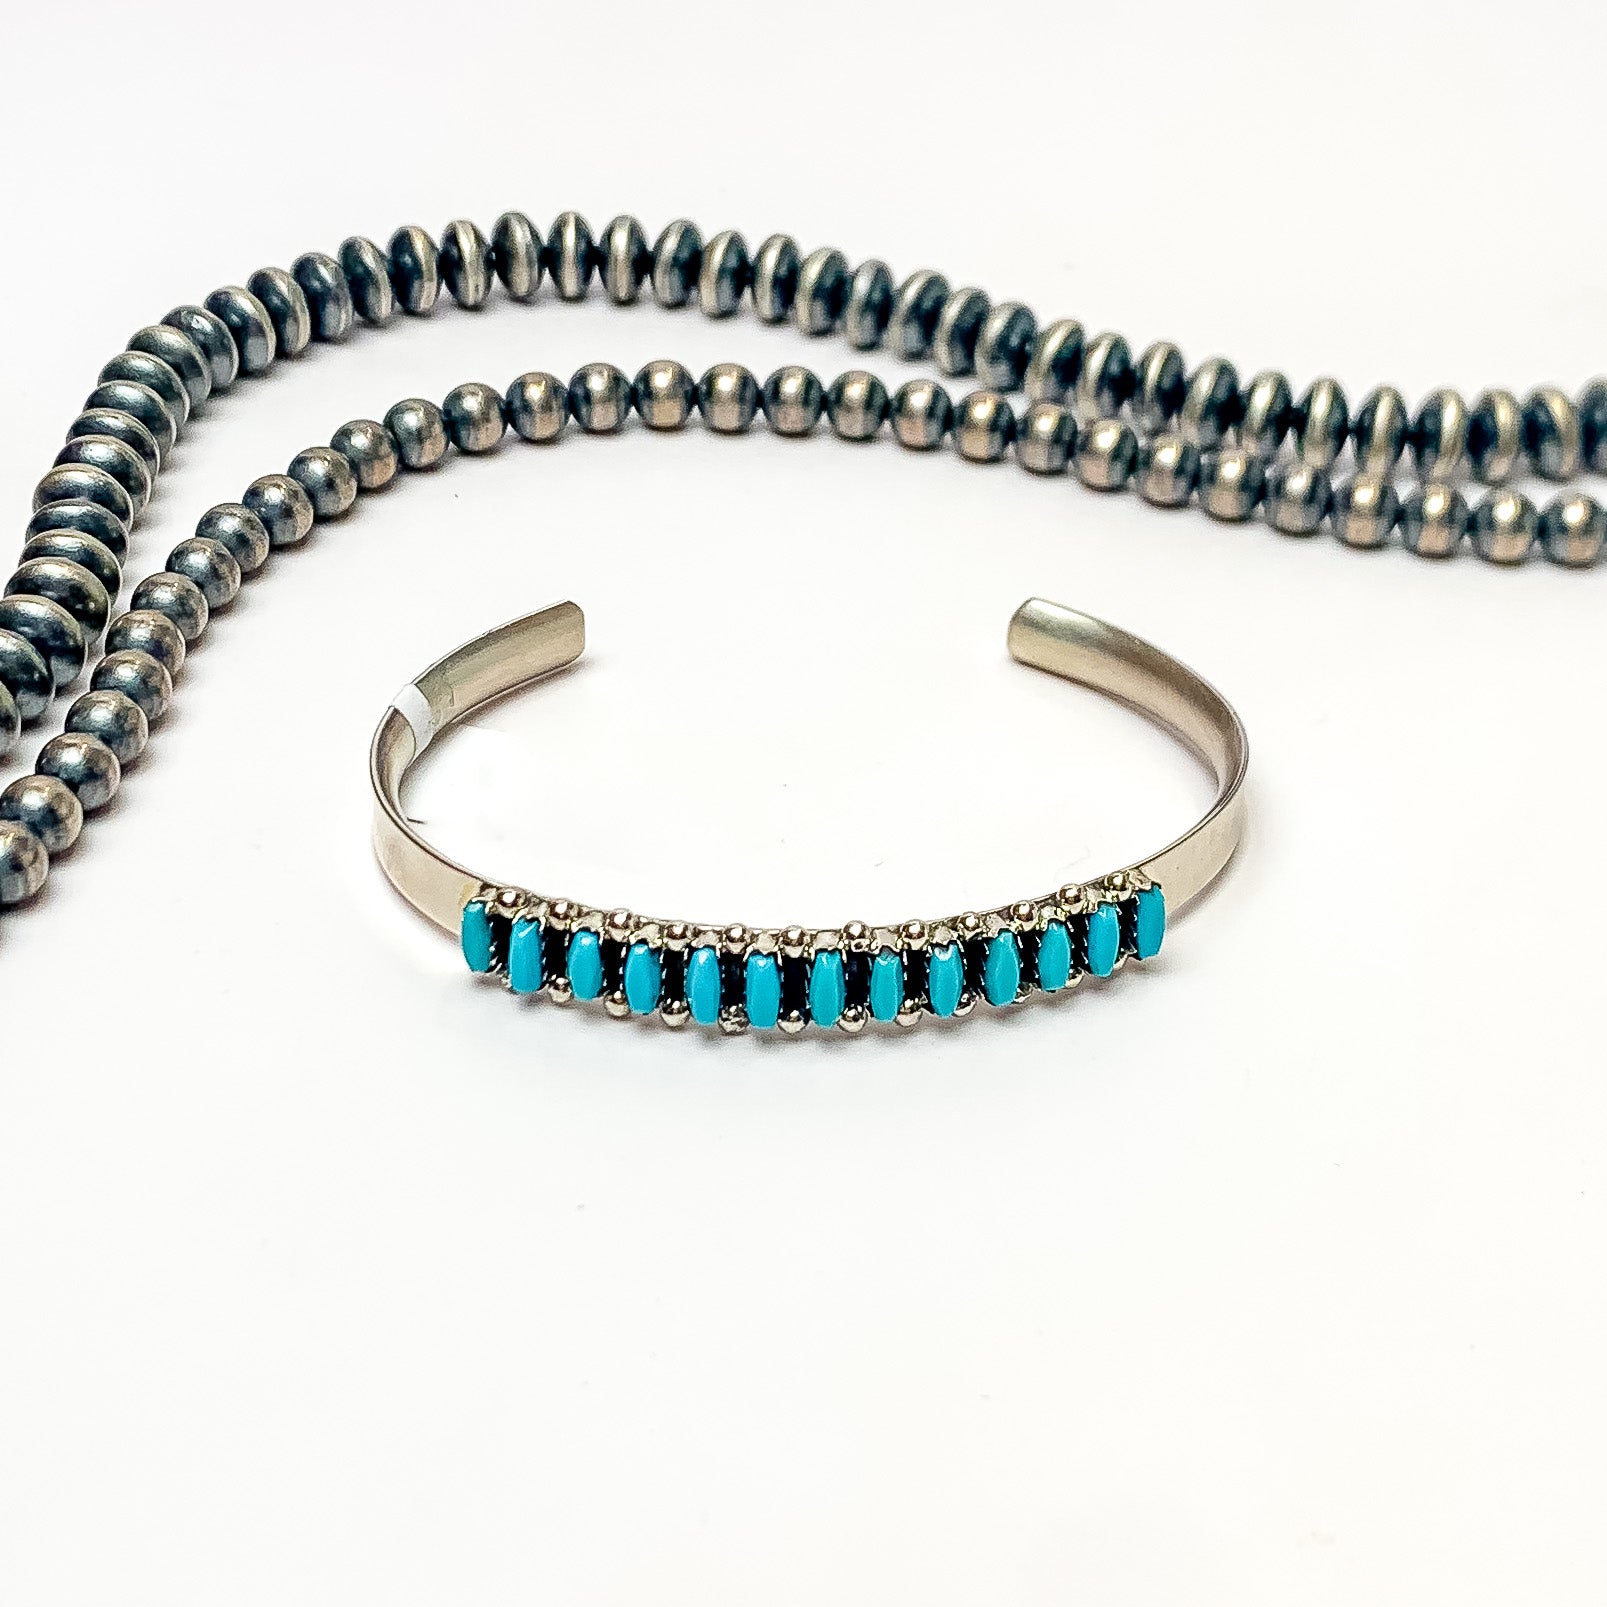 V Martz | Zuni Handmade Sterling Silver Cuff with Turquoise Stones - Giddy Up Glamour Boutique